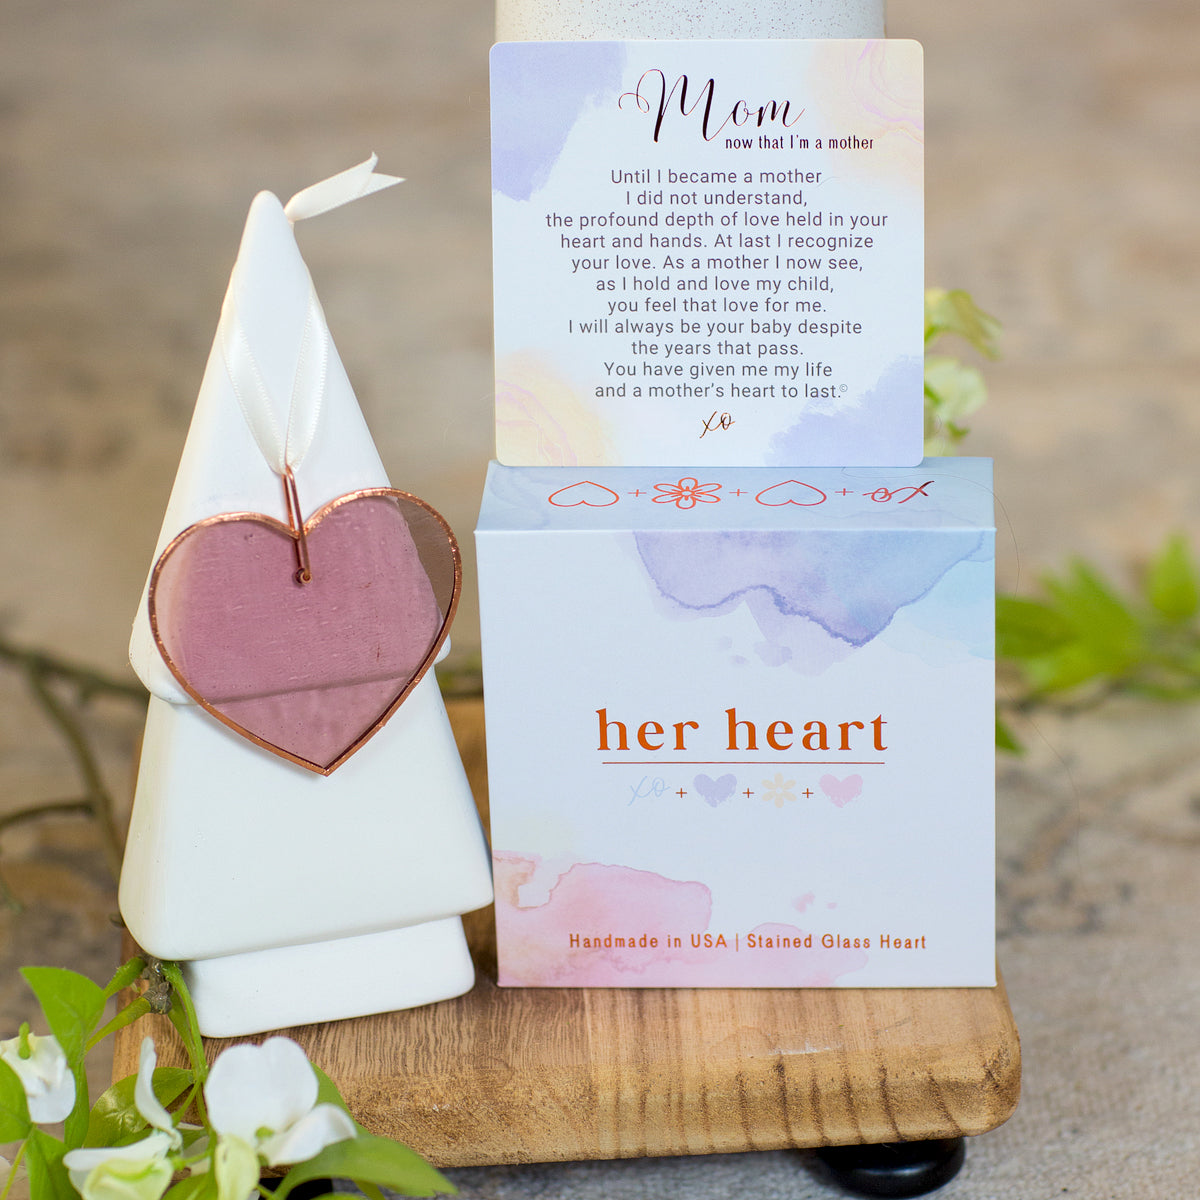 Her Heart for Mom, now that I'm a mother gift with box, sentiment card, and pink stain glass heart.